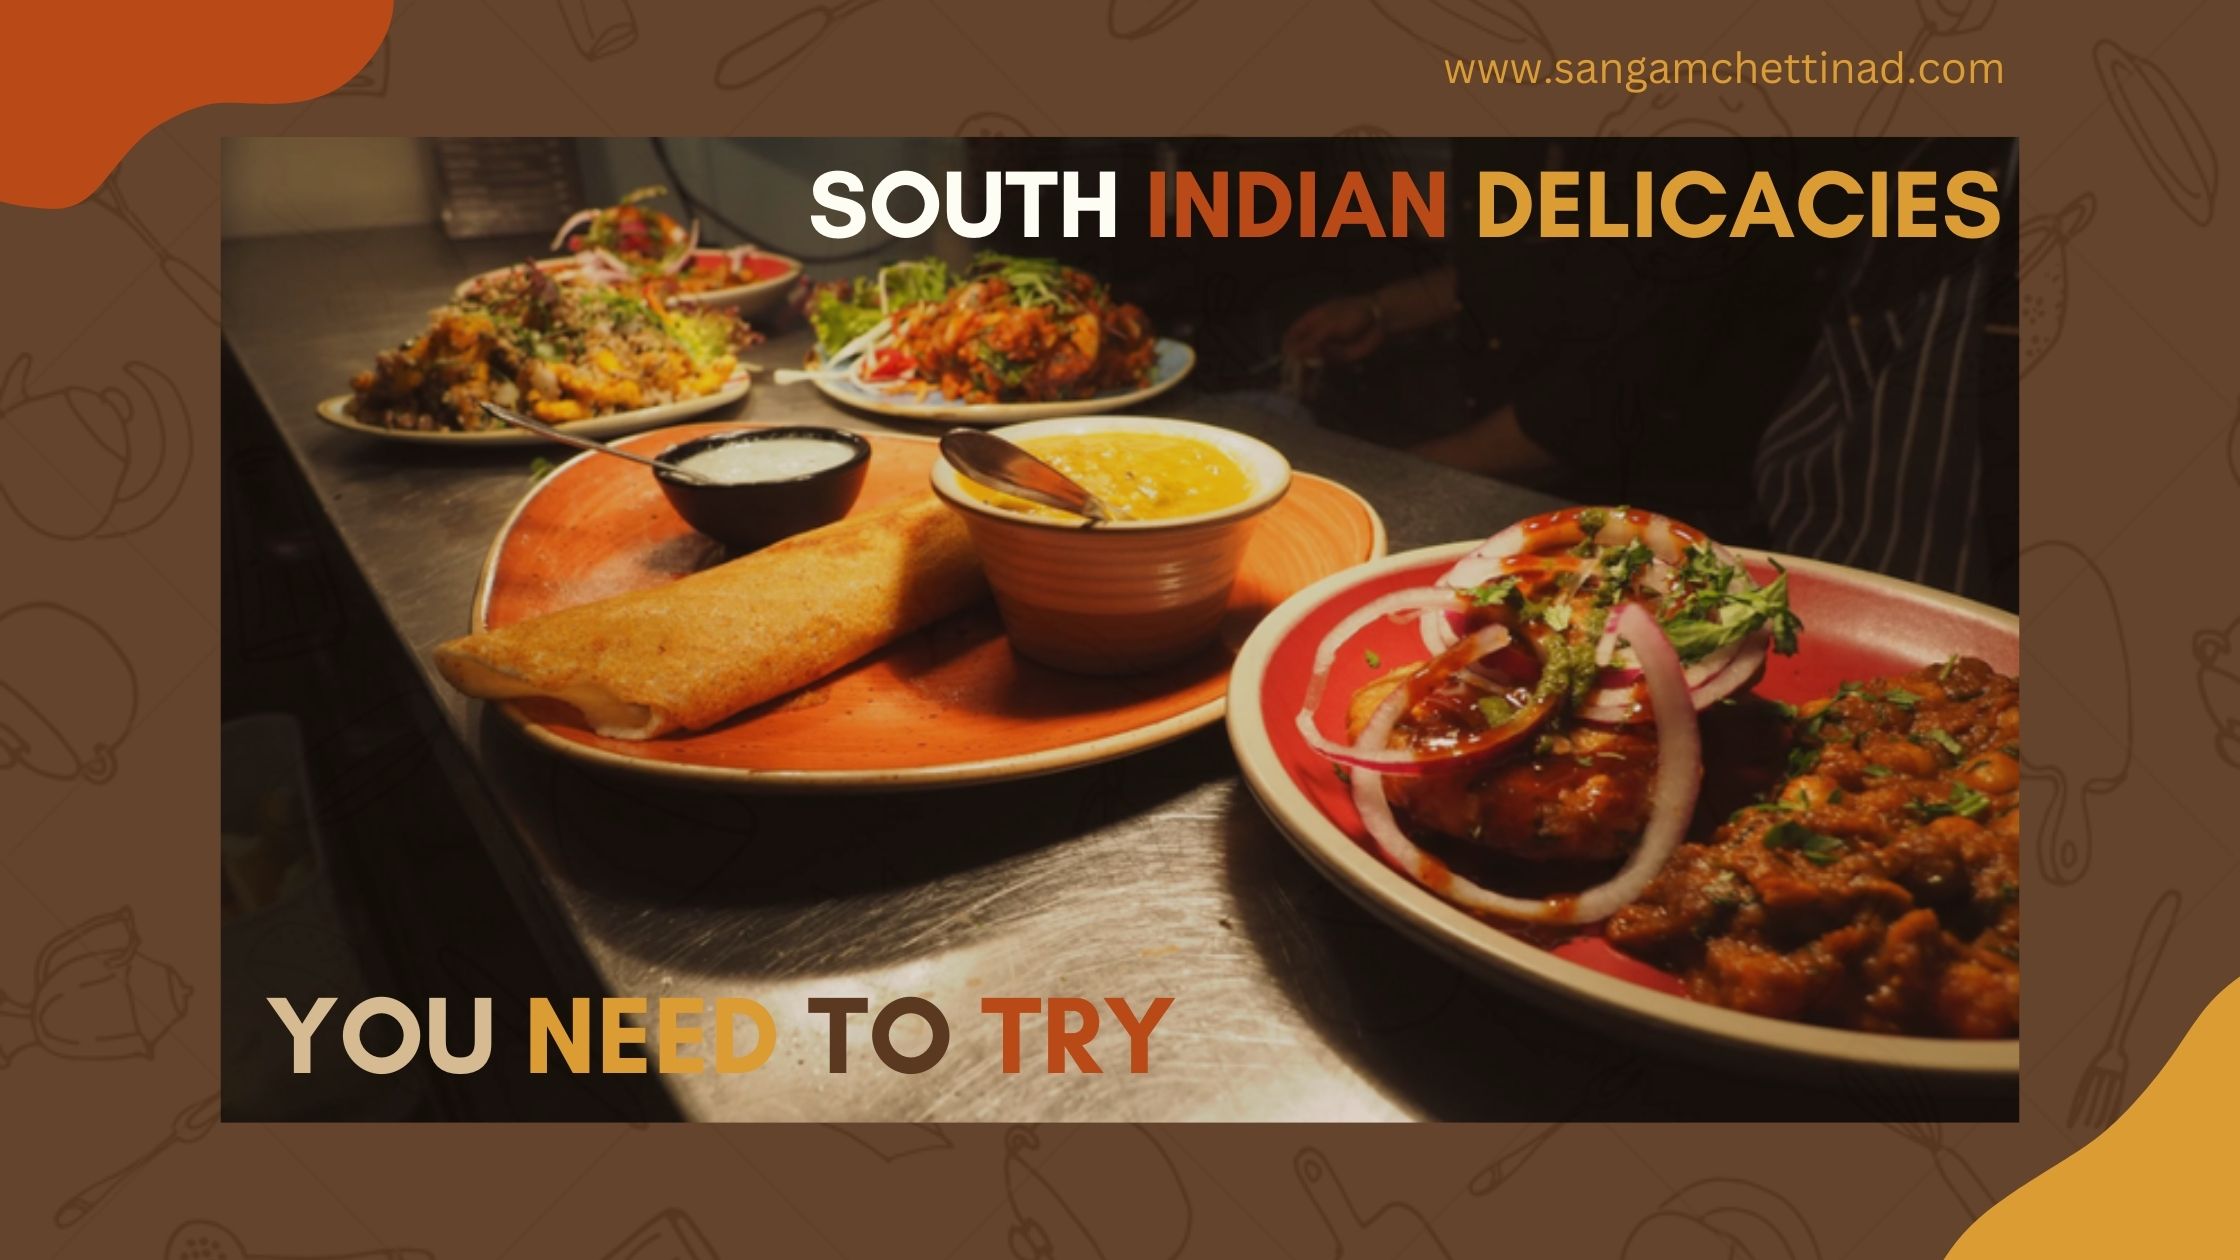 South Indian Delicacies You Need to Try